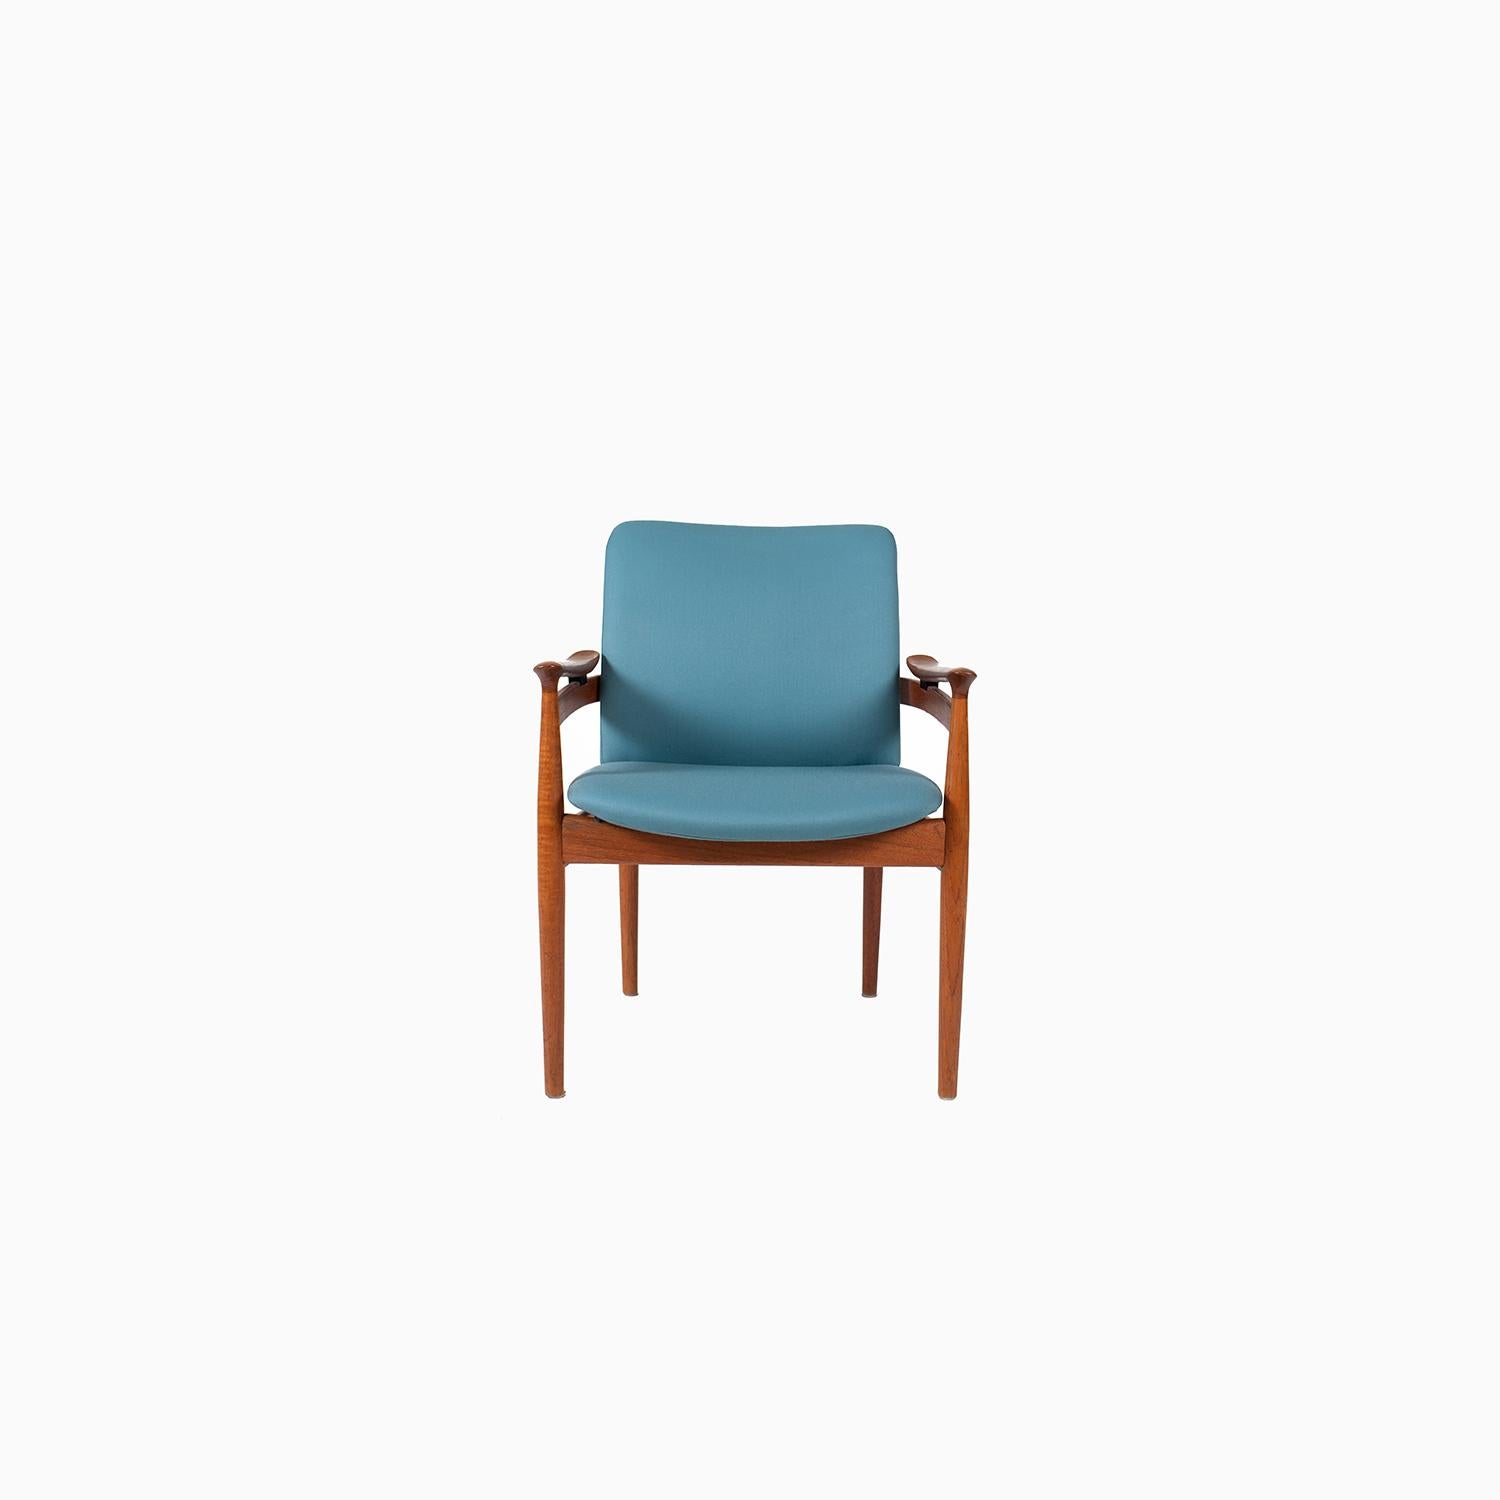 Finn Juhl Model 192 armchair in teak. Light blue upholstered seat and seat back. 


Professional, skilled furniture restoration is an integral part of what we do every day. Our goal 
is to provide beautiful, functional furniture that honors its